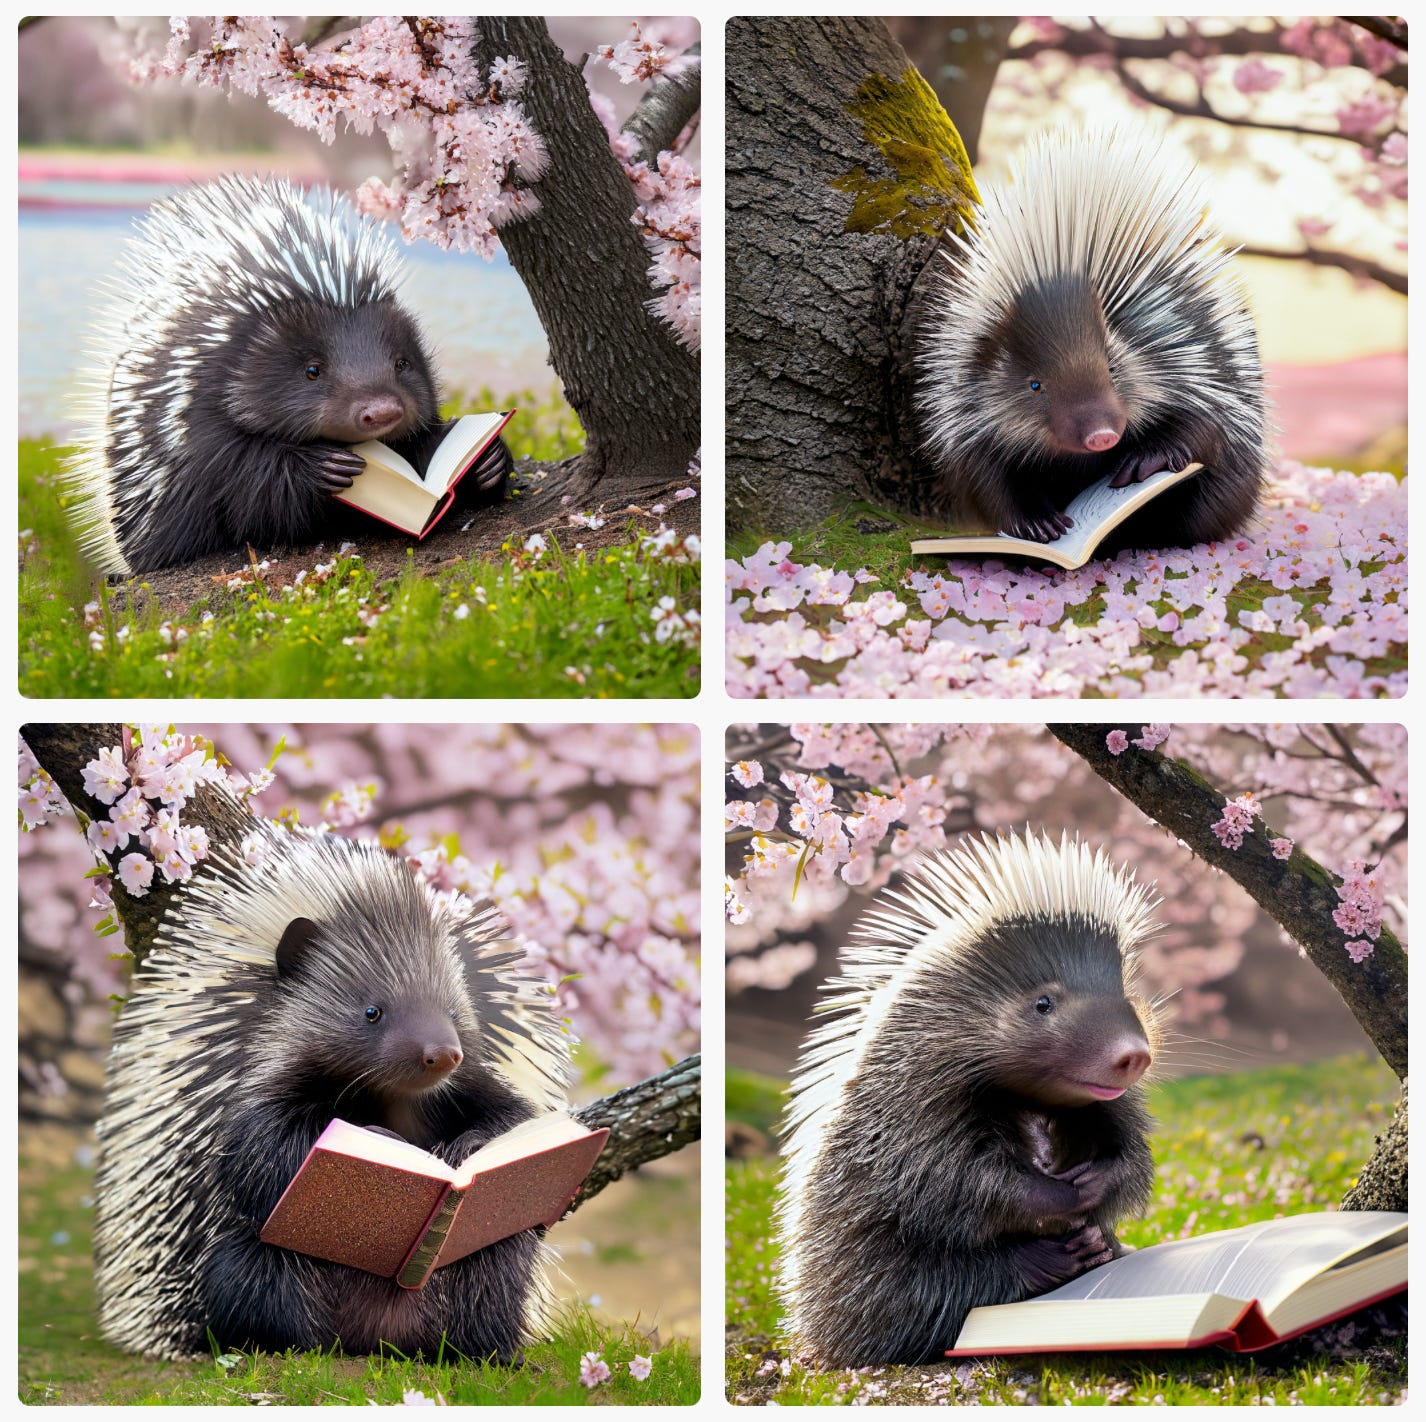 Four AI-generated images of a porcupine reading a book at the base of a tree with cherry blossoms.